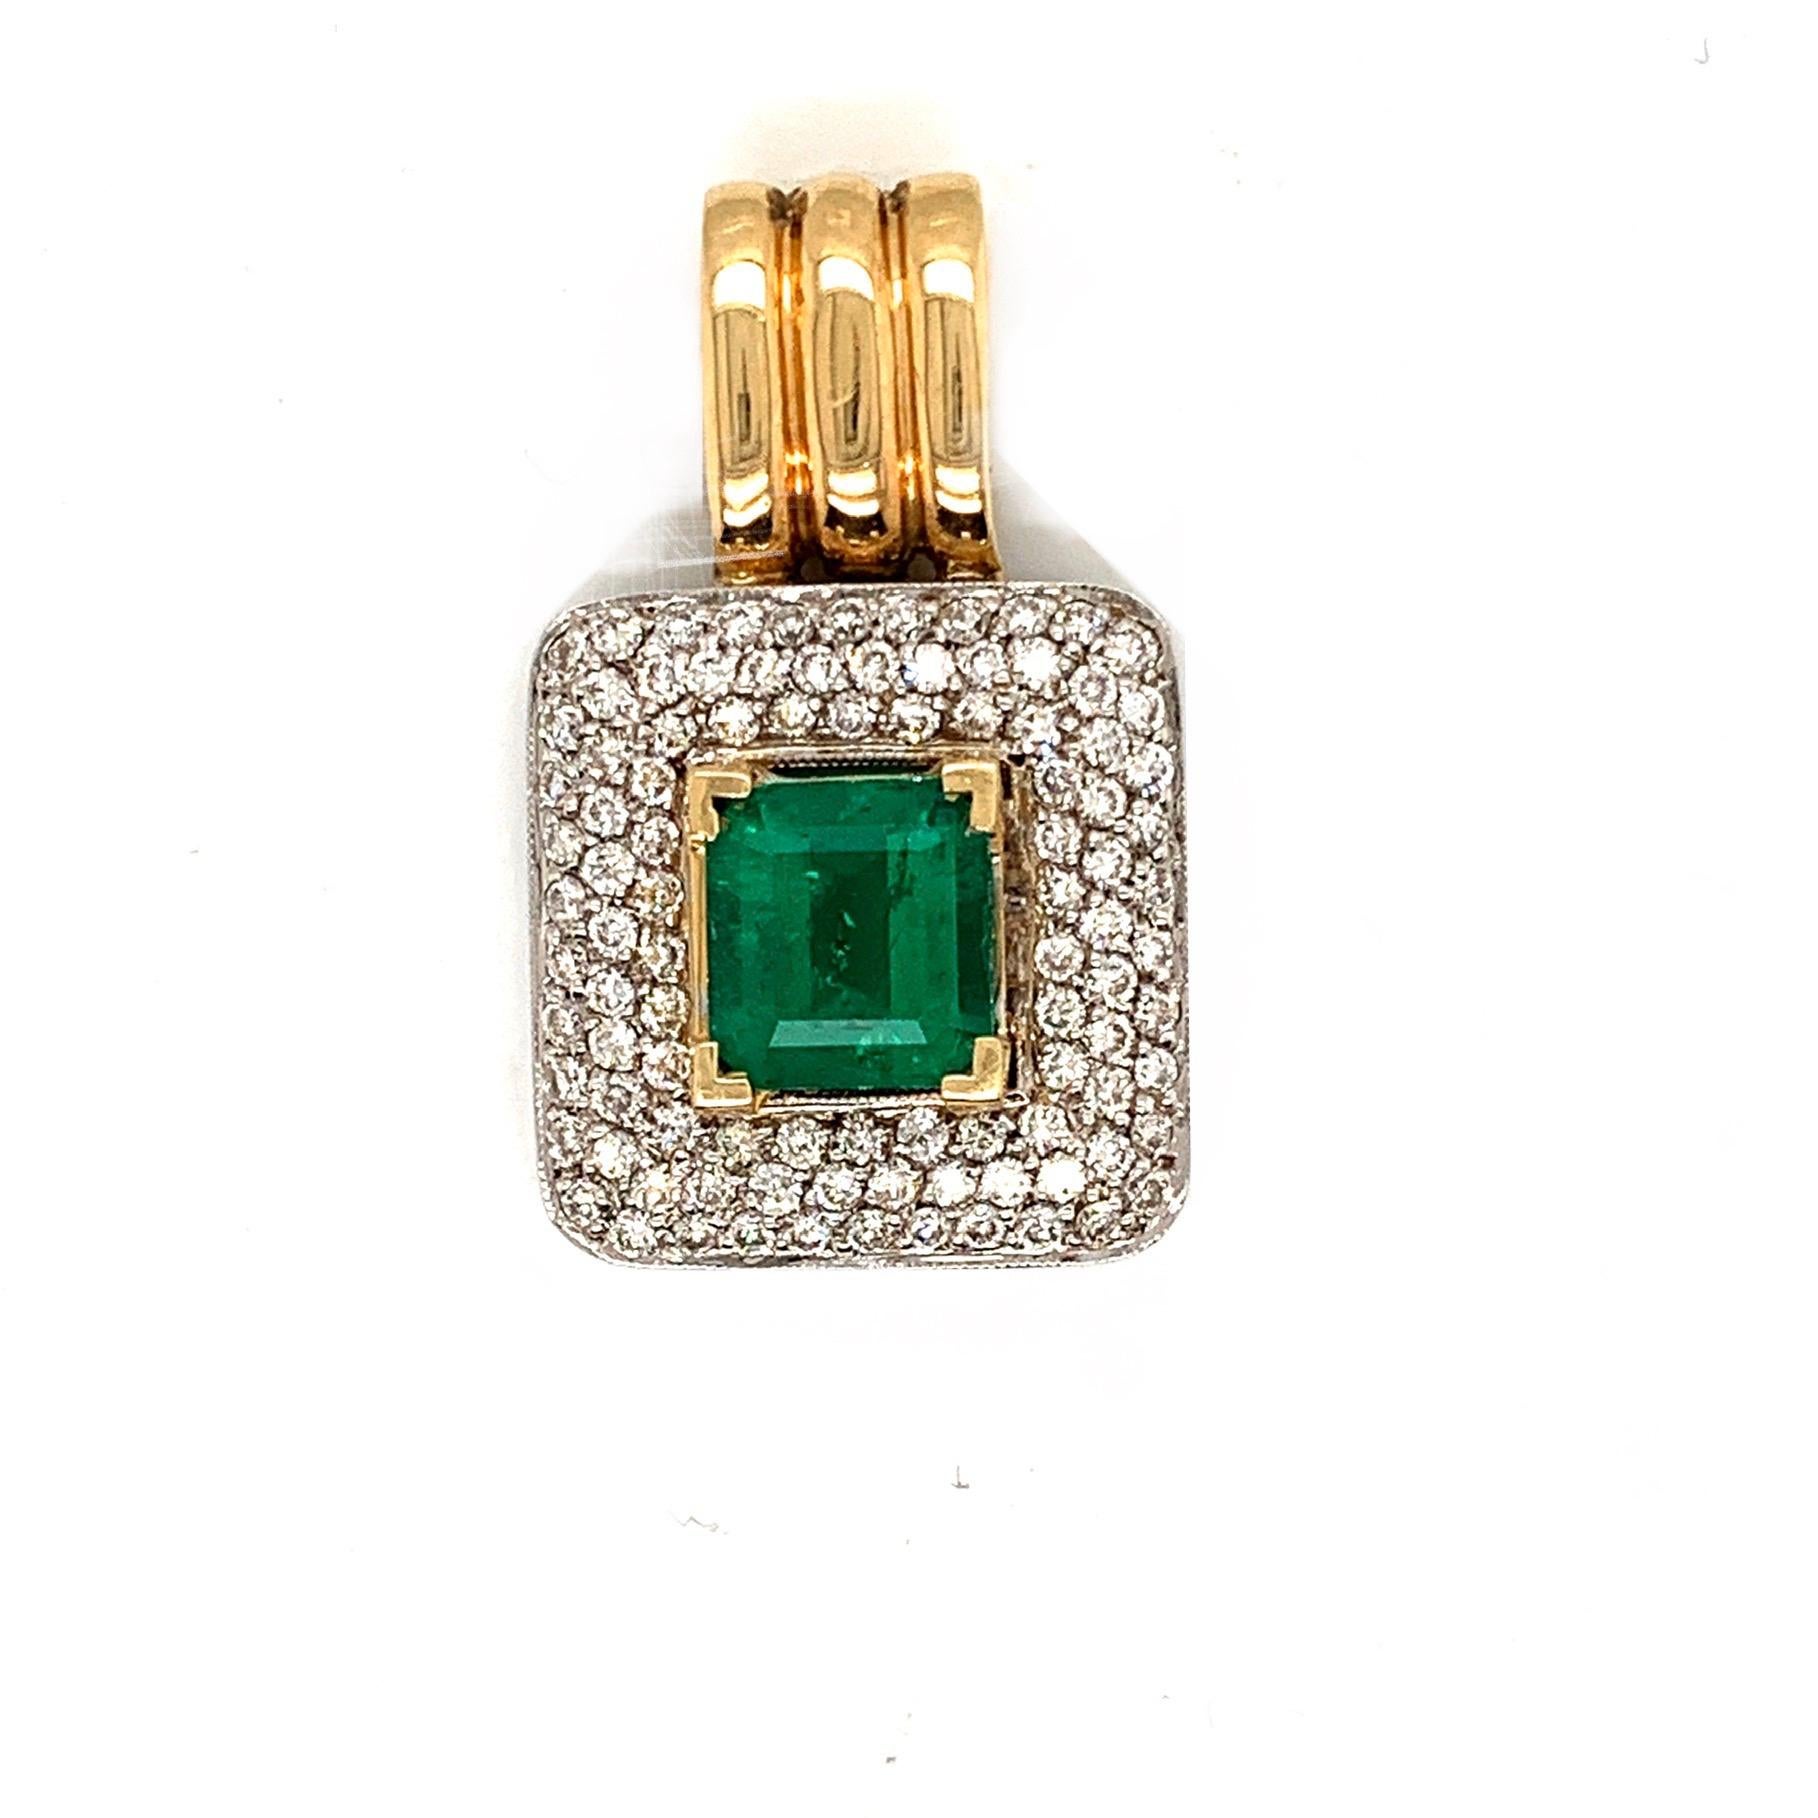 This unusual pendant featuring a 3 1/2 carat Colombian Emerald. Mounted in platinum and 18k Gold setting with a pave’ of 5 1/2 carats of white Diamonds.
Colombian emeralds are said to be the purest emeralds in the world, when it comes to rich